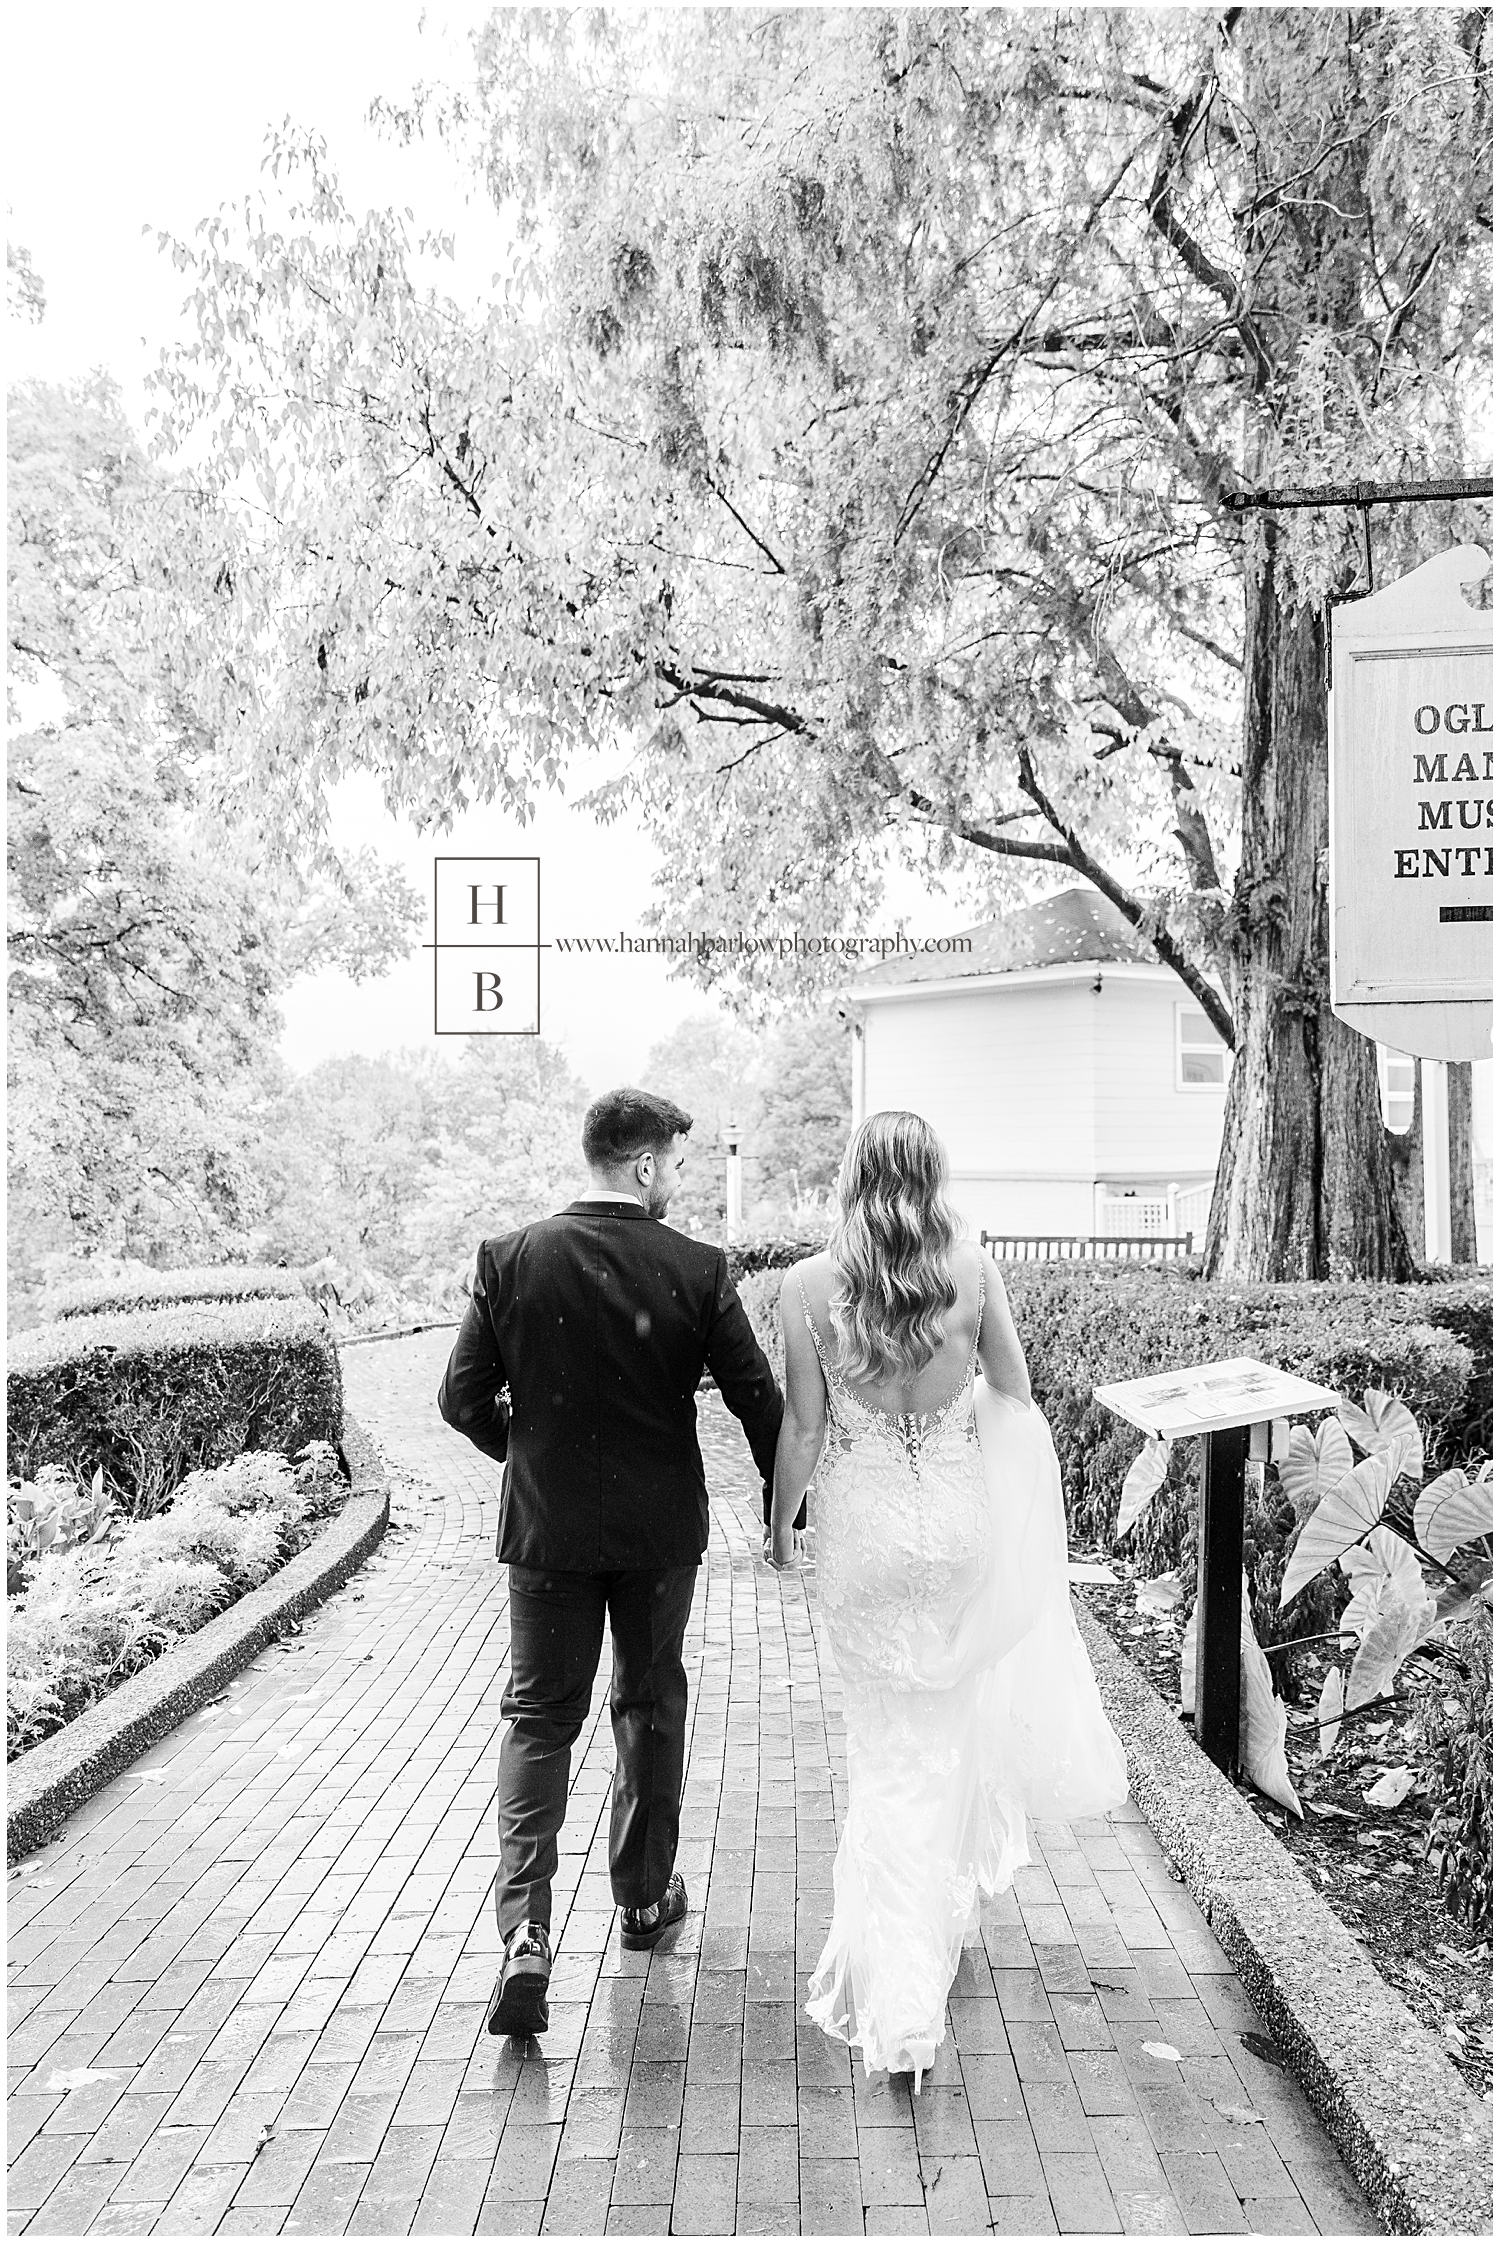 Black and white photo of bride and groom walking away from photographer in rain.